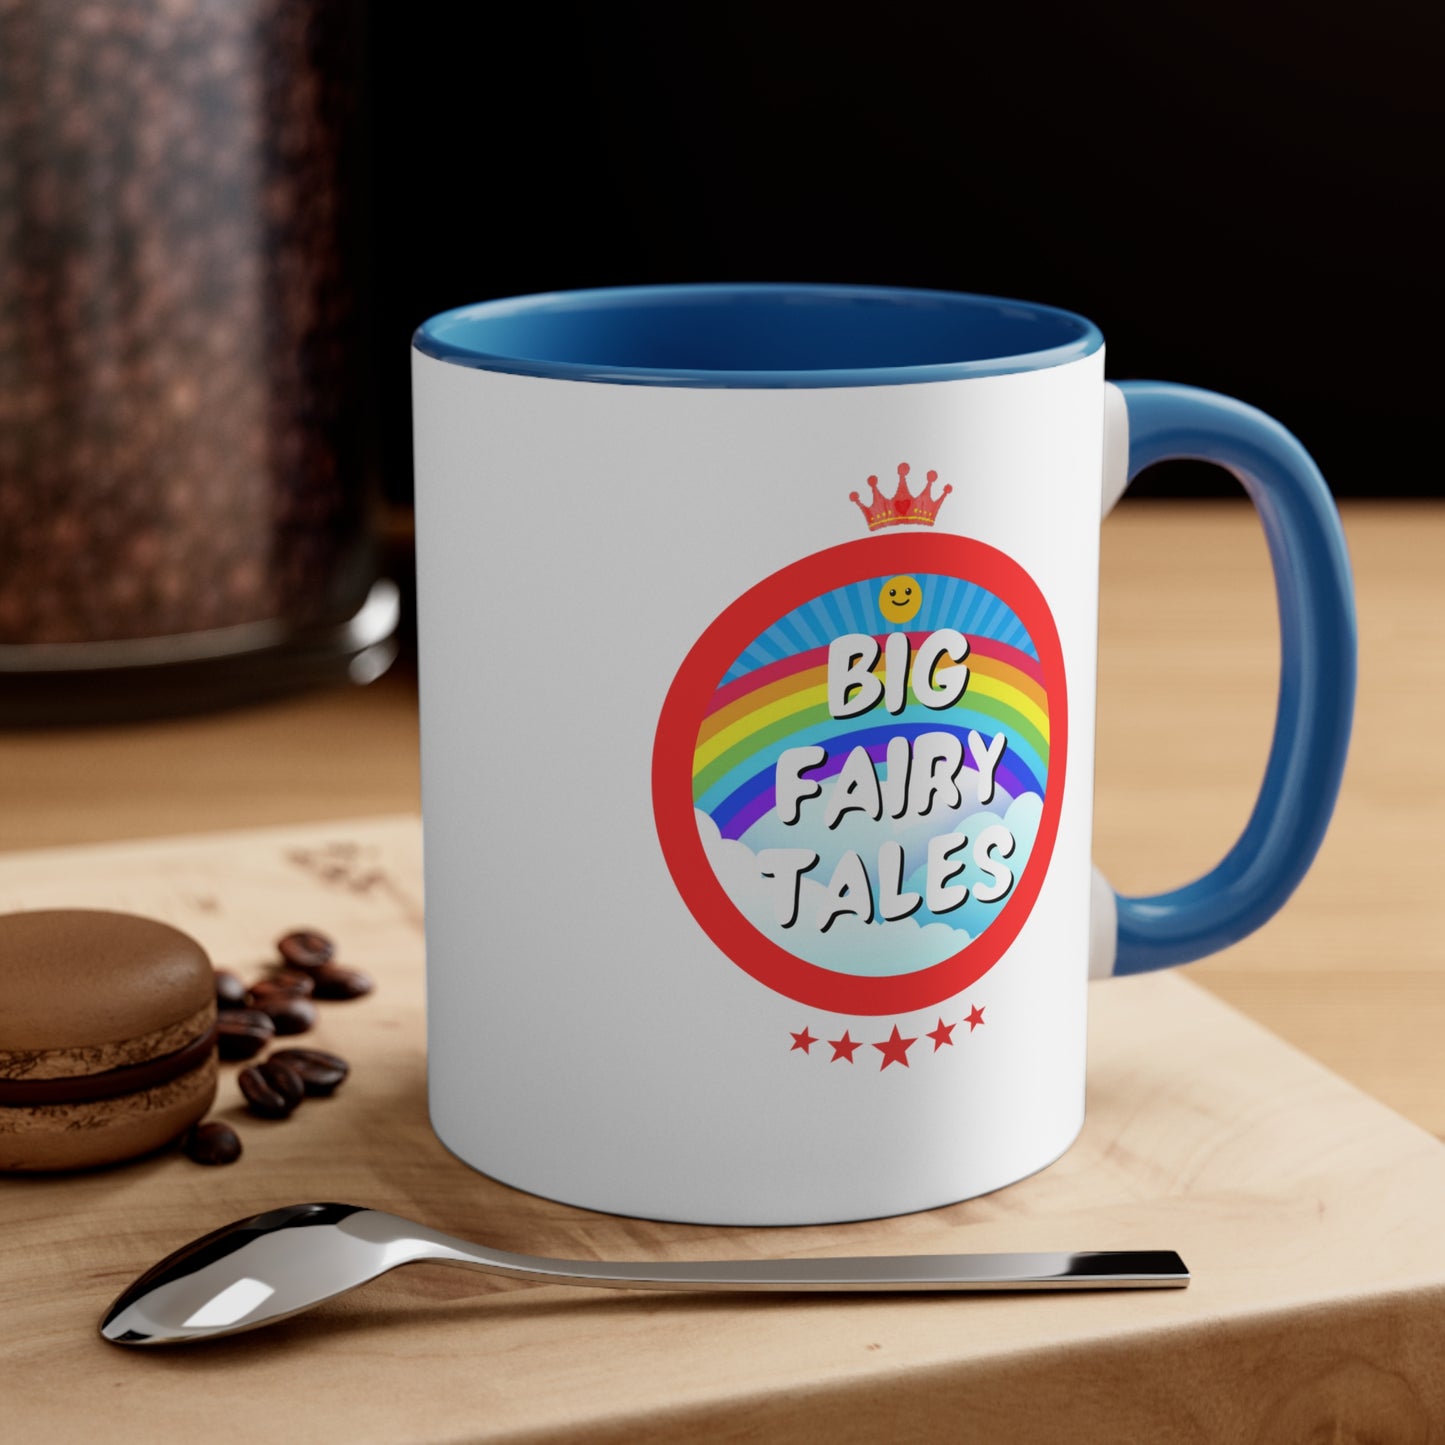 Big Fairy Tales By Schatar Rainbow Dreamscape: The Mug Of Whimsy For Dreamers - 11oz